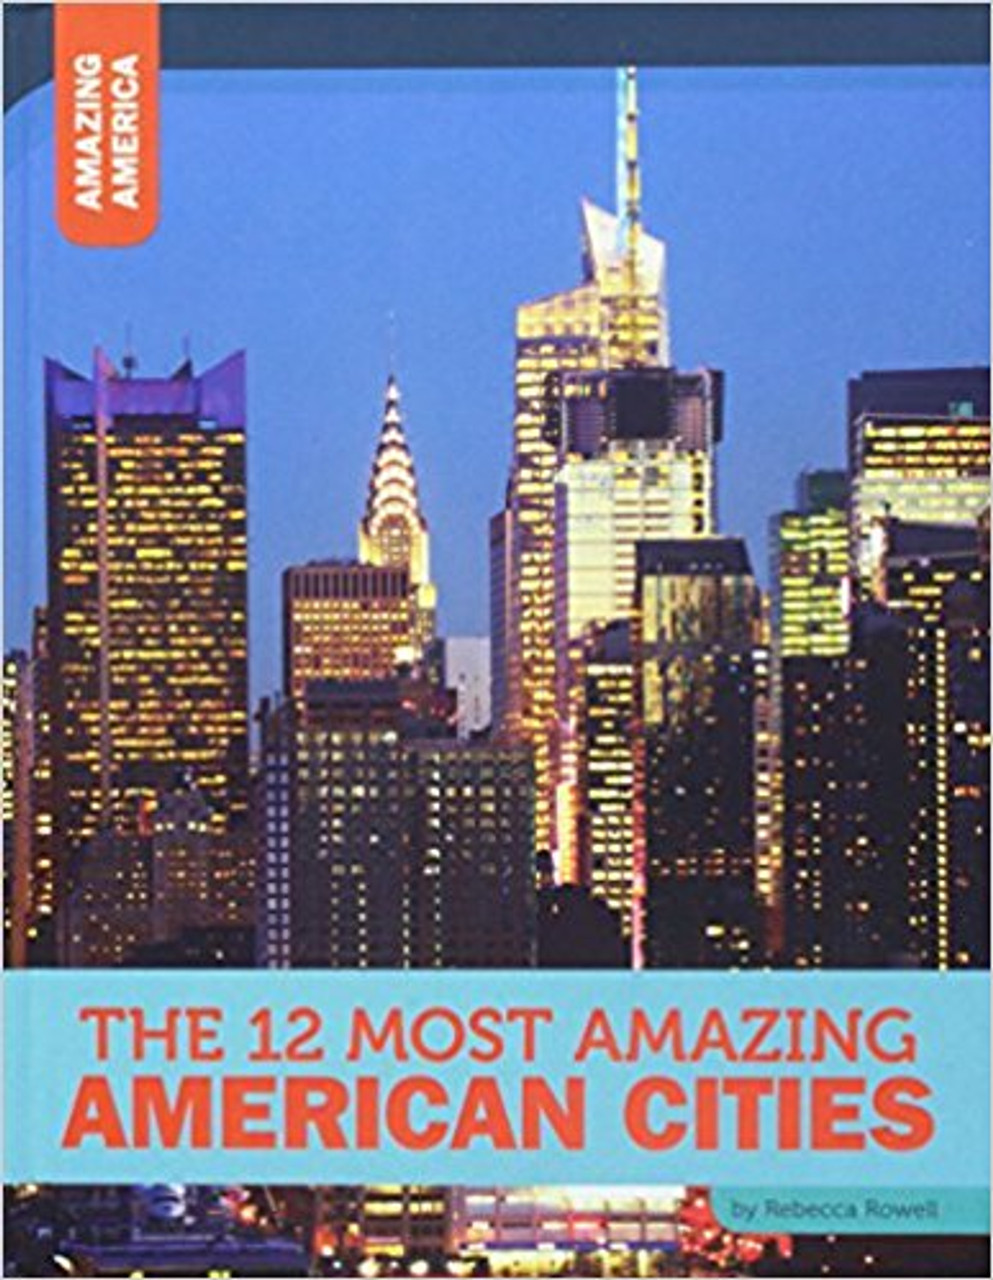 The 12 Most Amazing American Cities by DeAnn Herringshaw